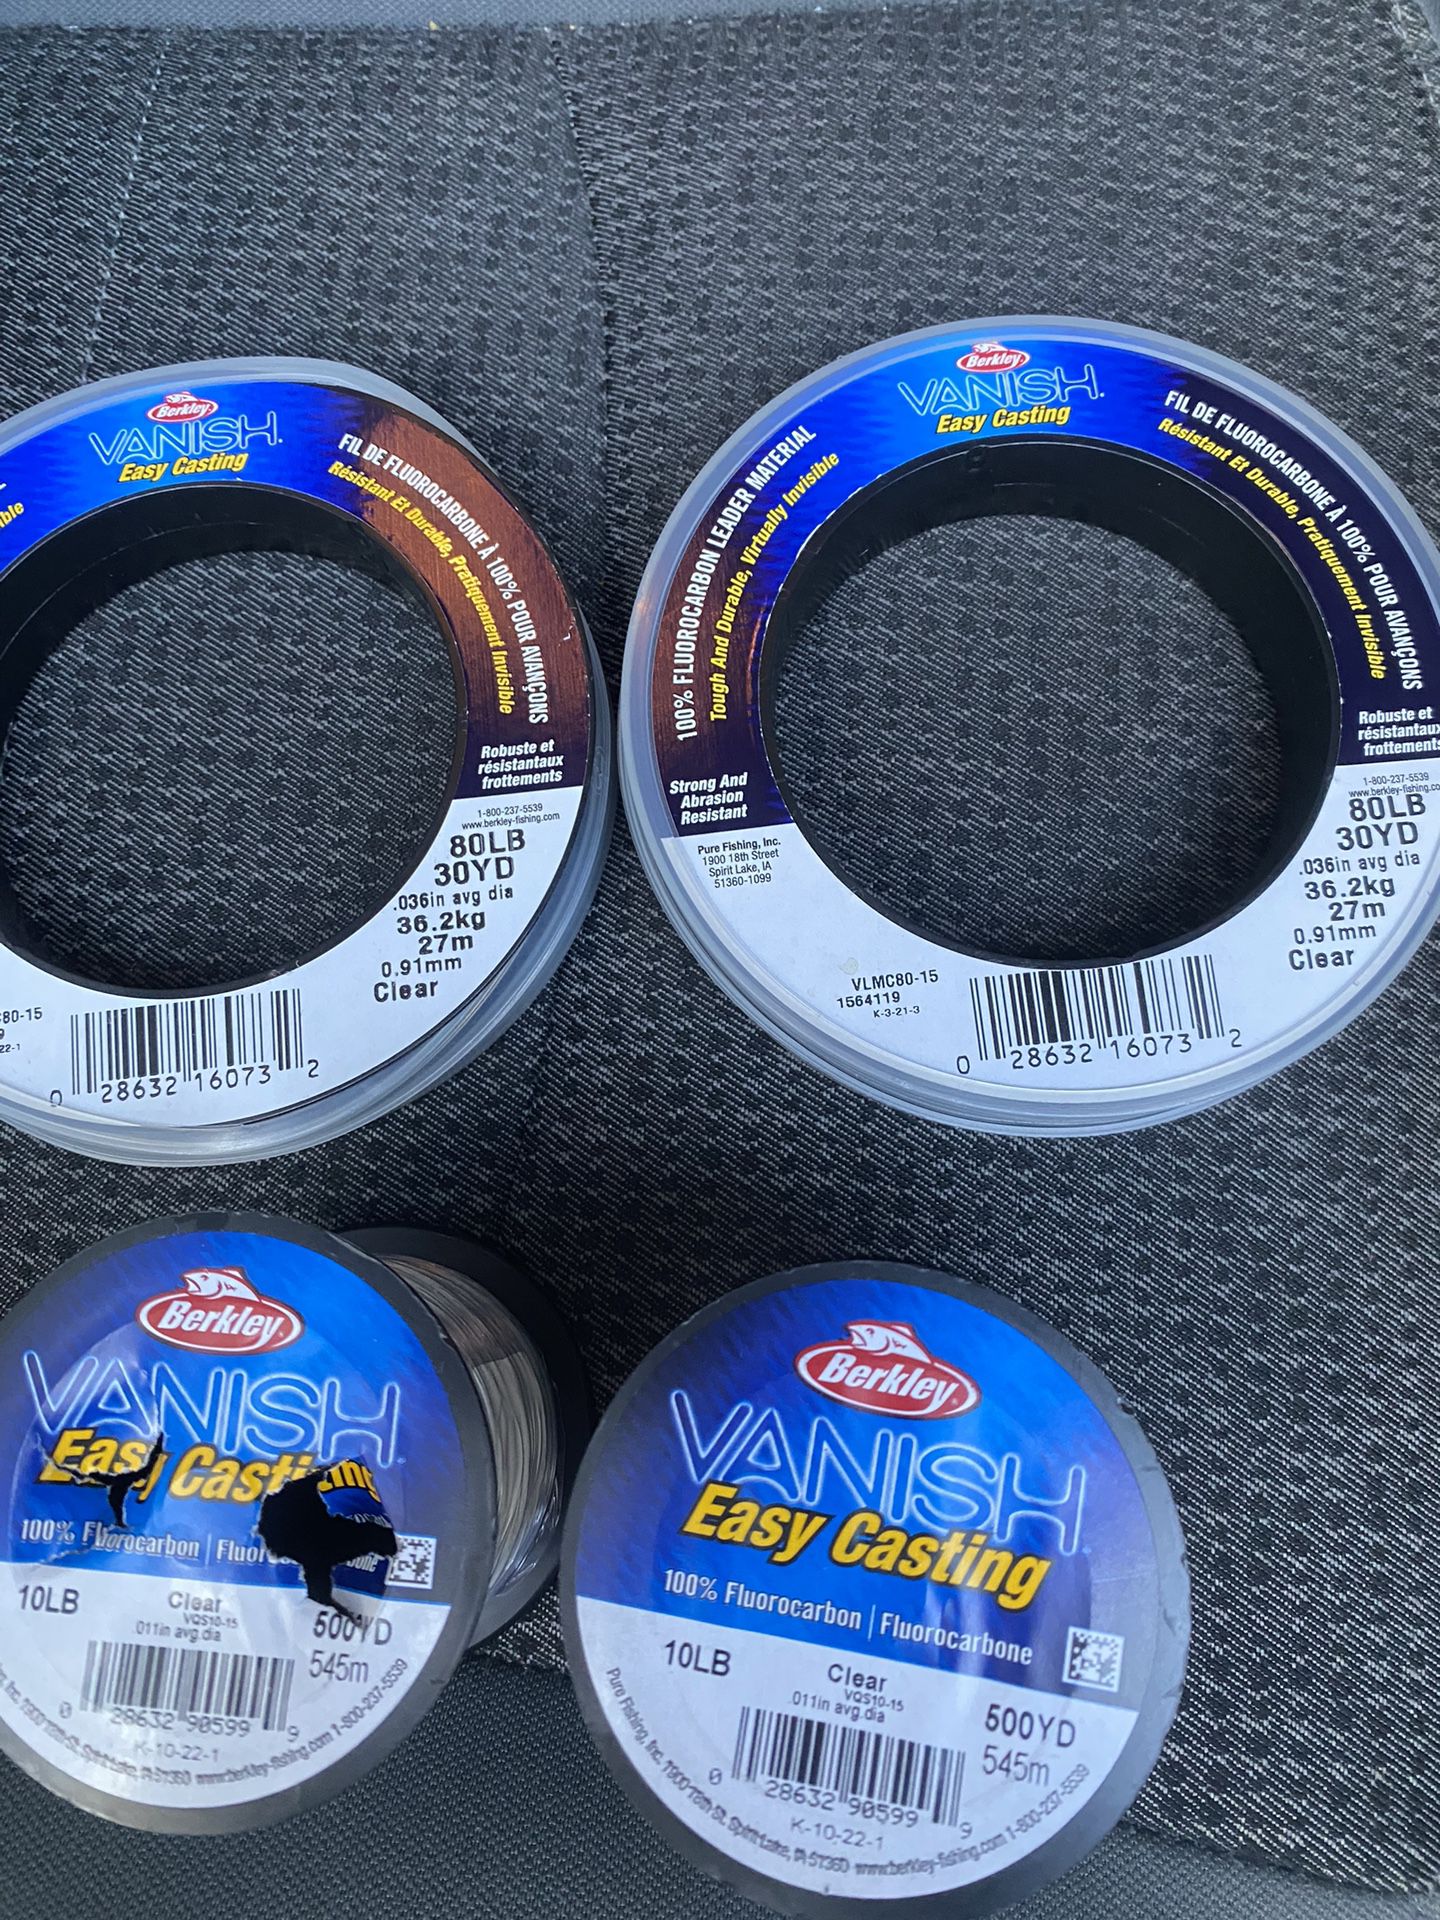 Brand New 80 Lb Vanish Leader Line, and Two Spools Of 10 Pound